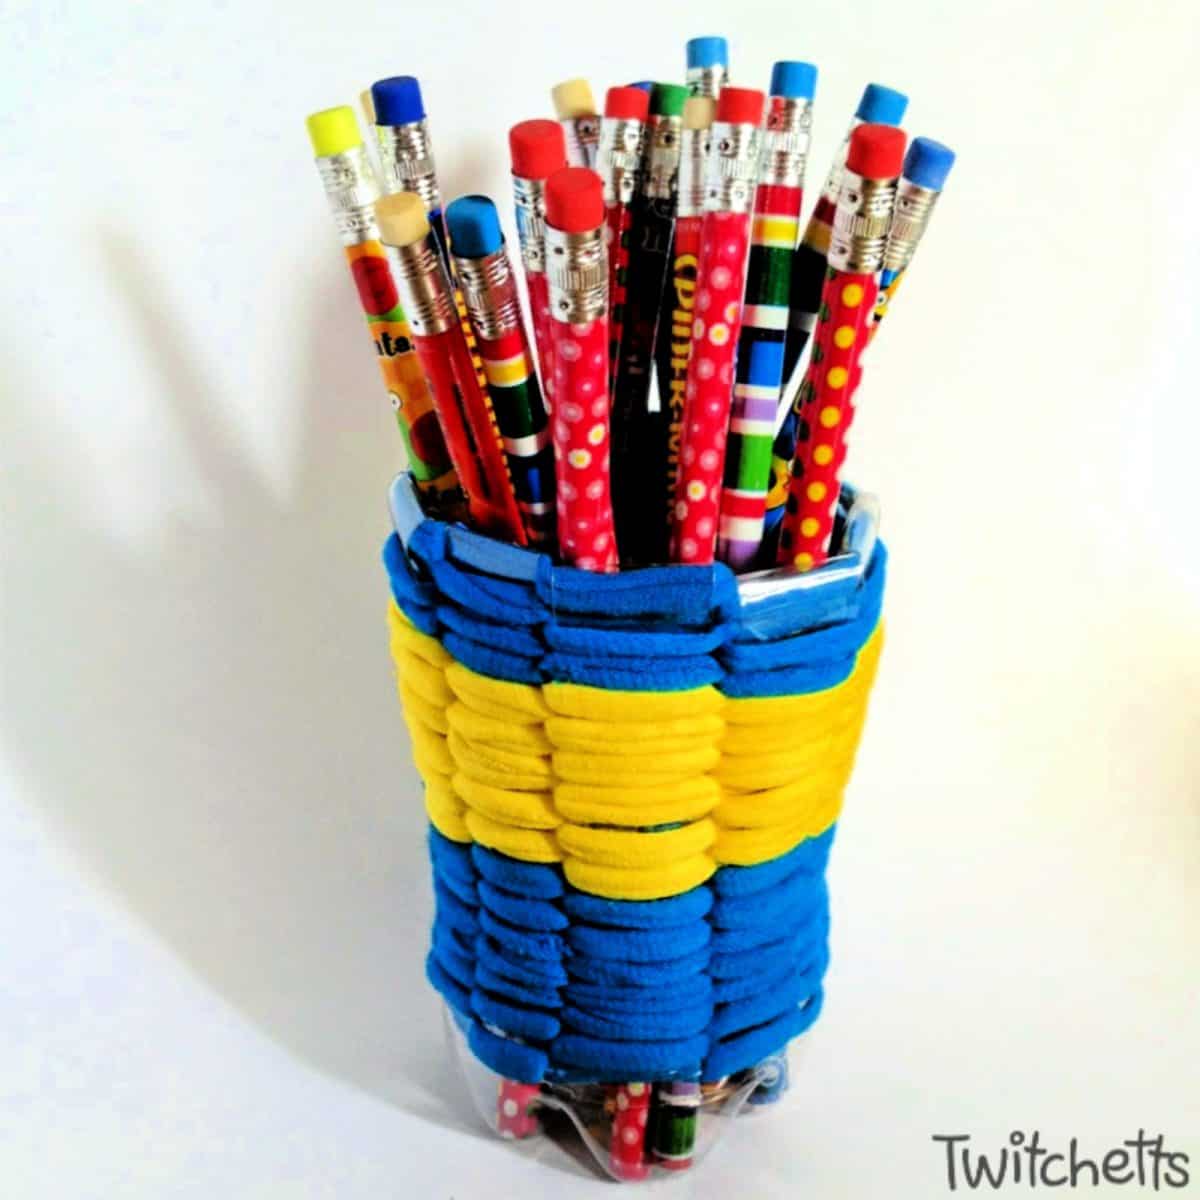 How To Make A Recycled Pencil Holder From Plastic Bottles Twitchetts